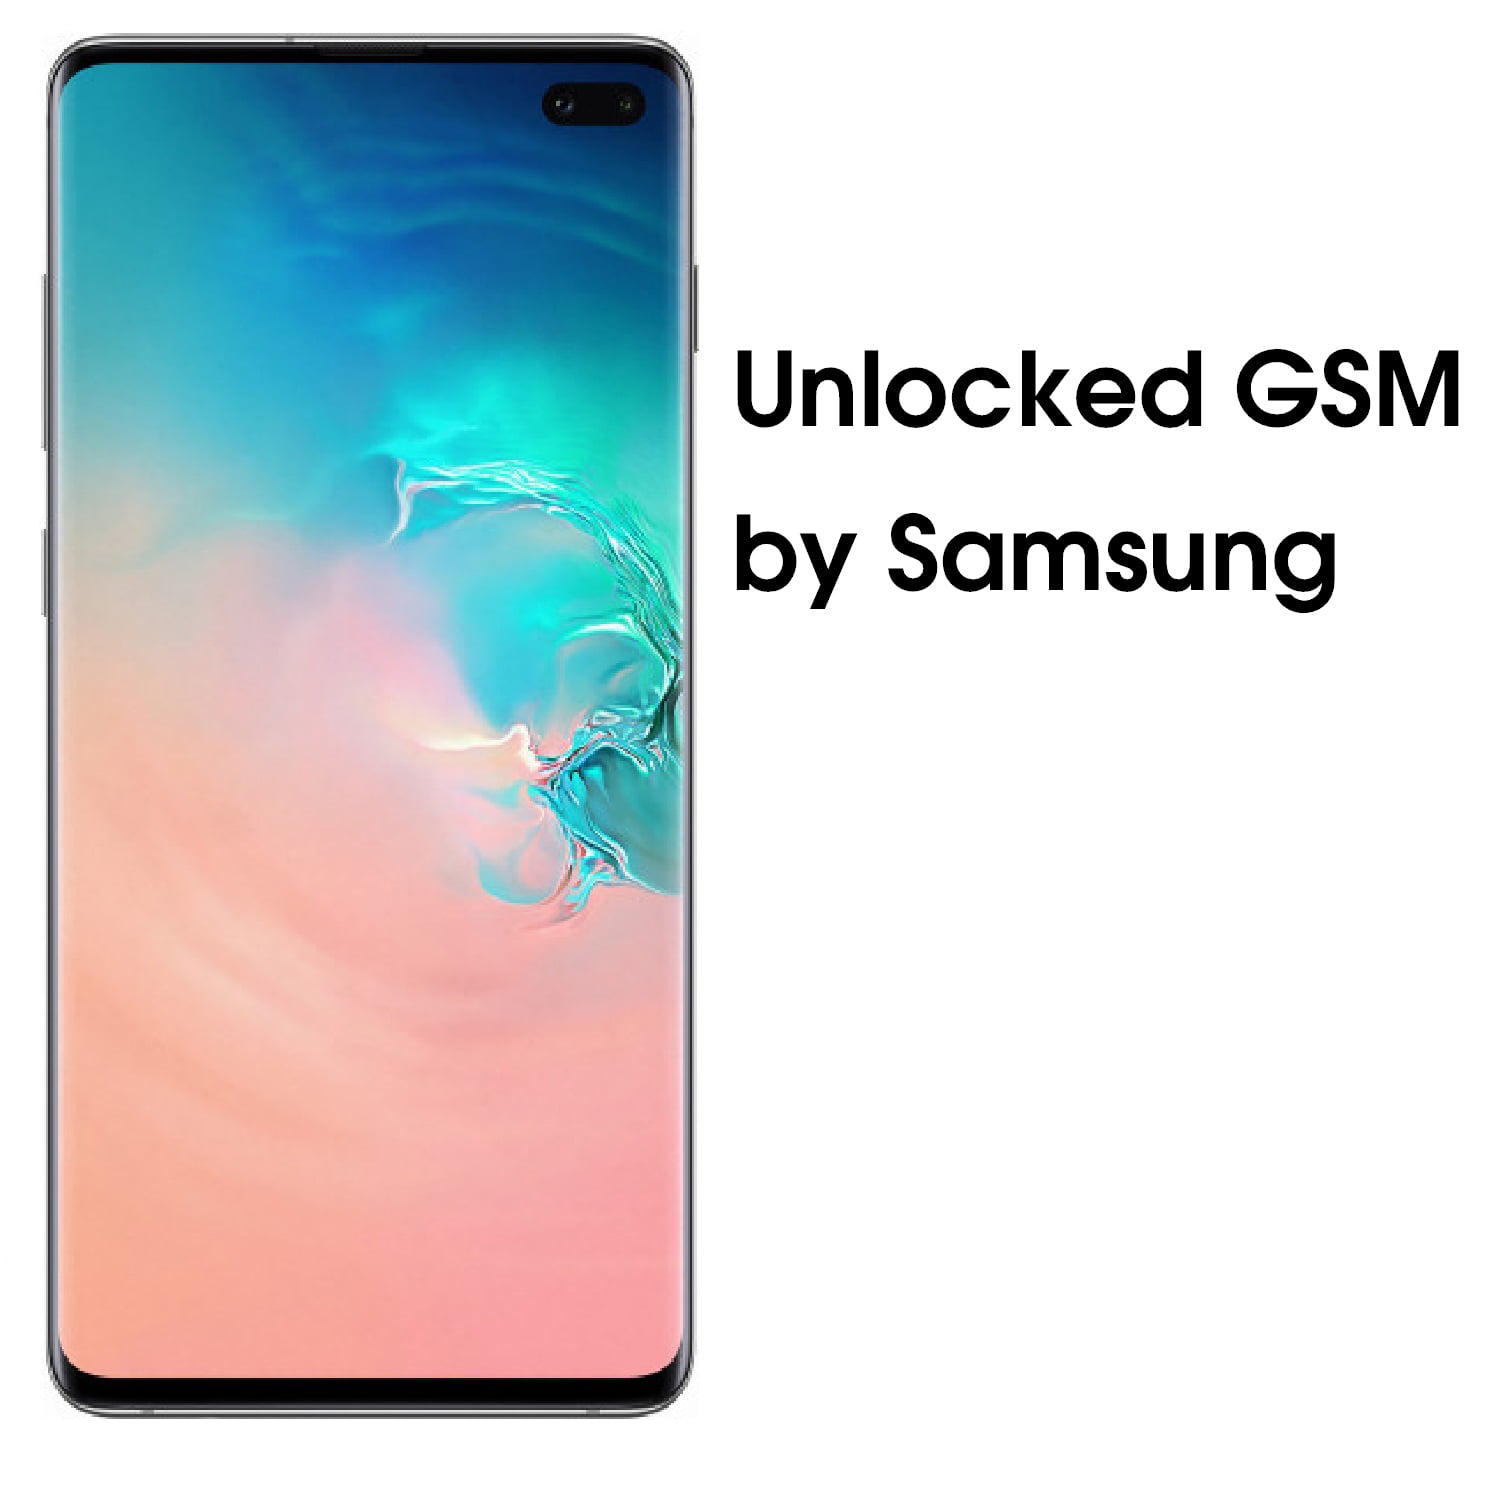 Samsung Galaxy S10+ G975 128GB Unlocked GSM LTE Phone with Triple 12MP+12MP+16MP Rear Camera - Prism White